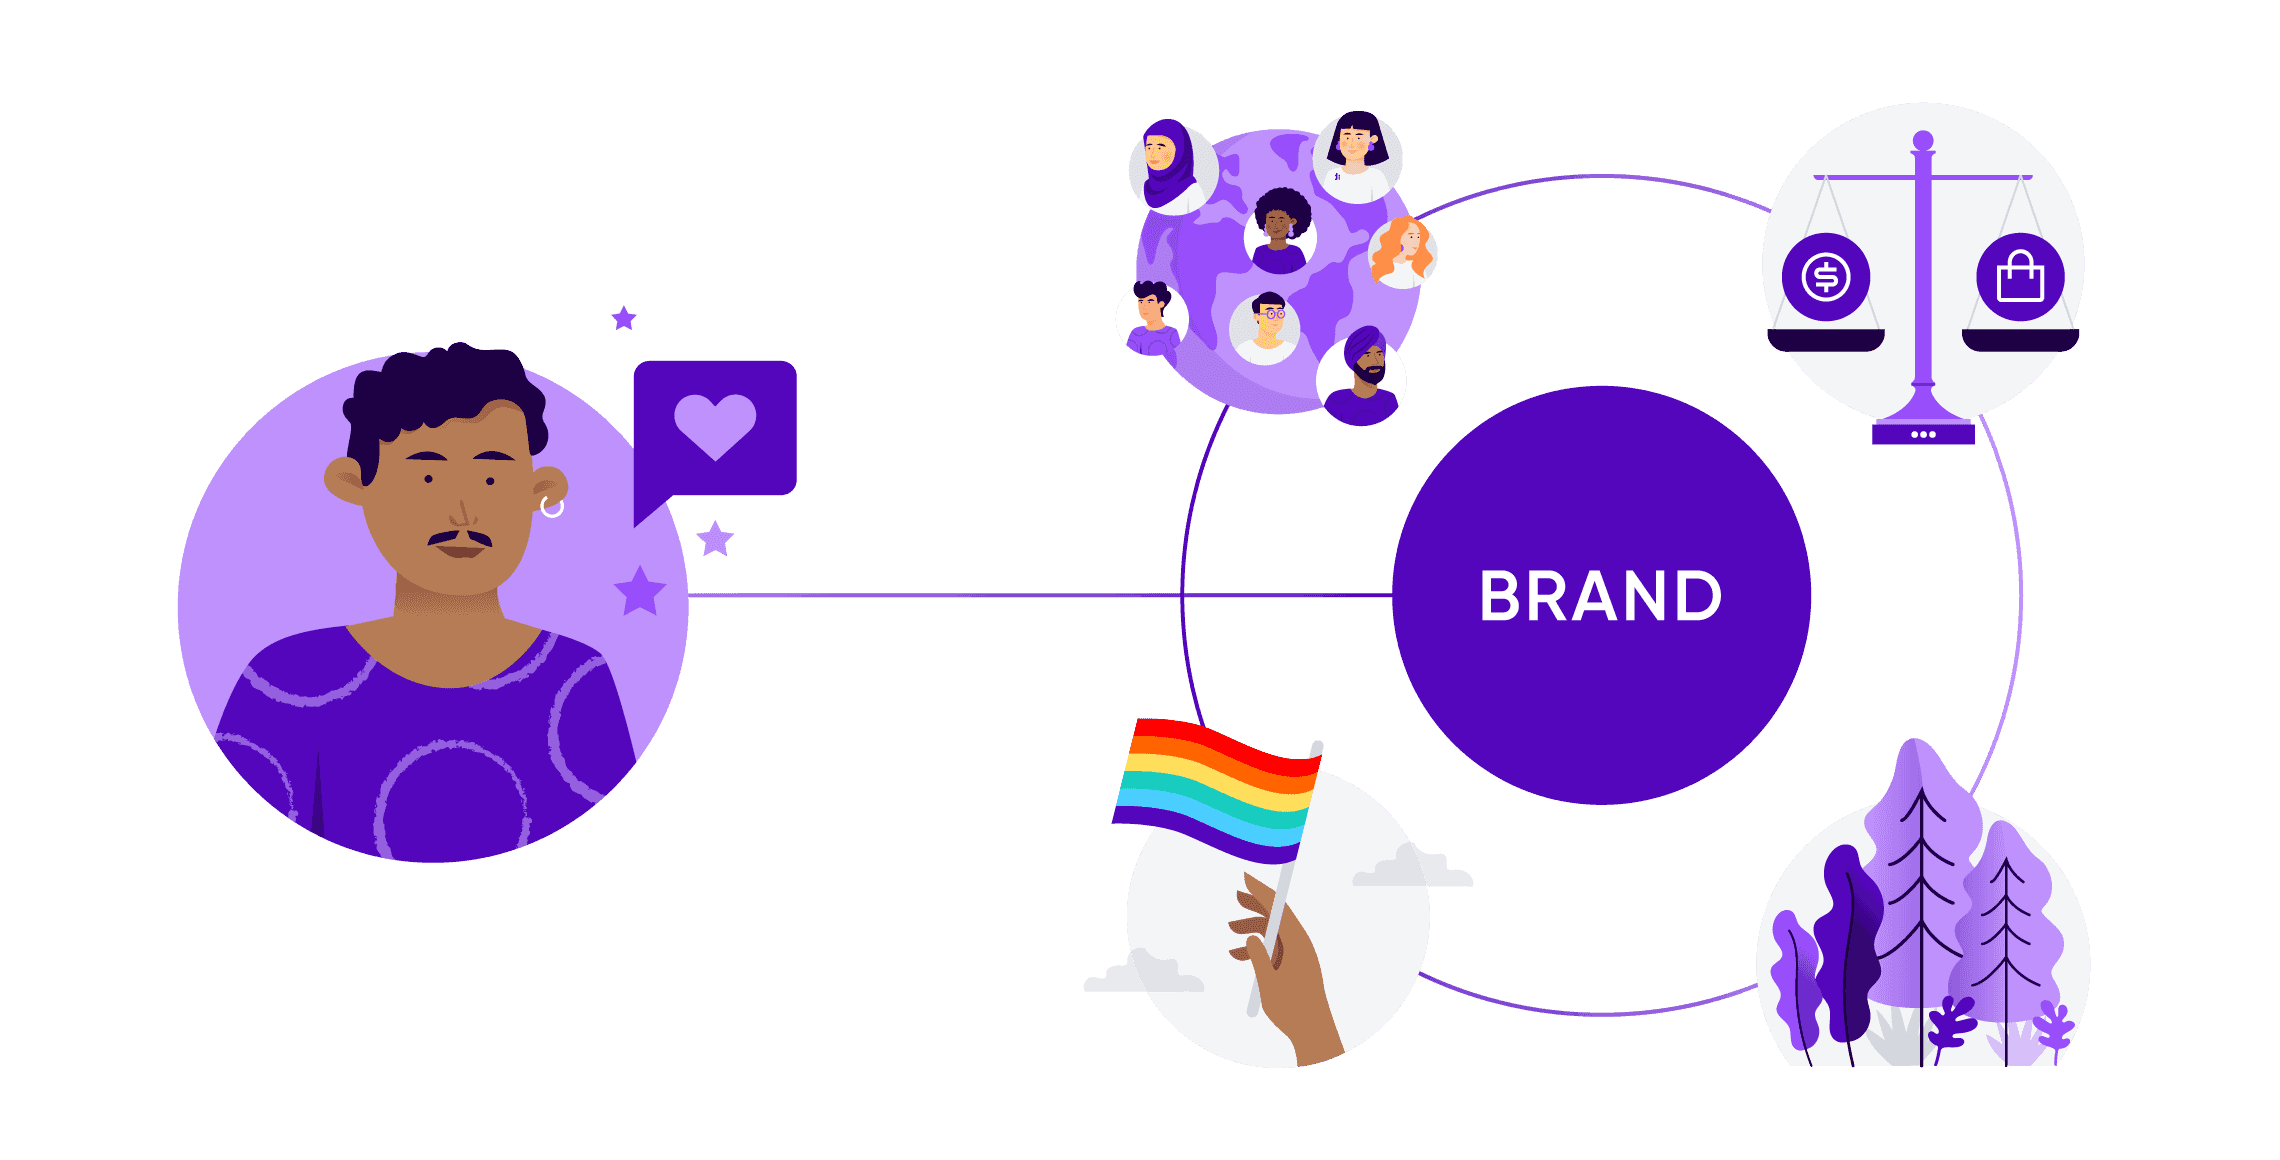 Customer connections to brand values